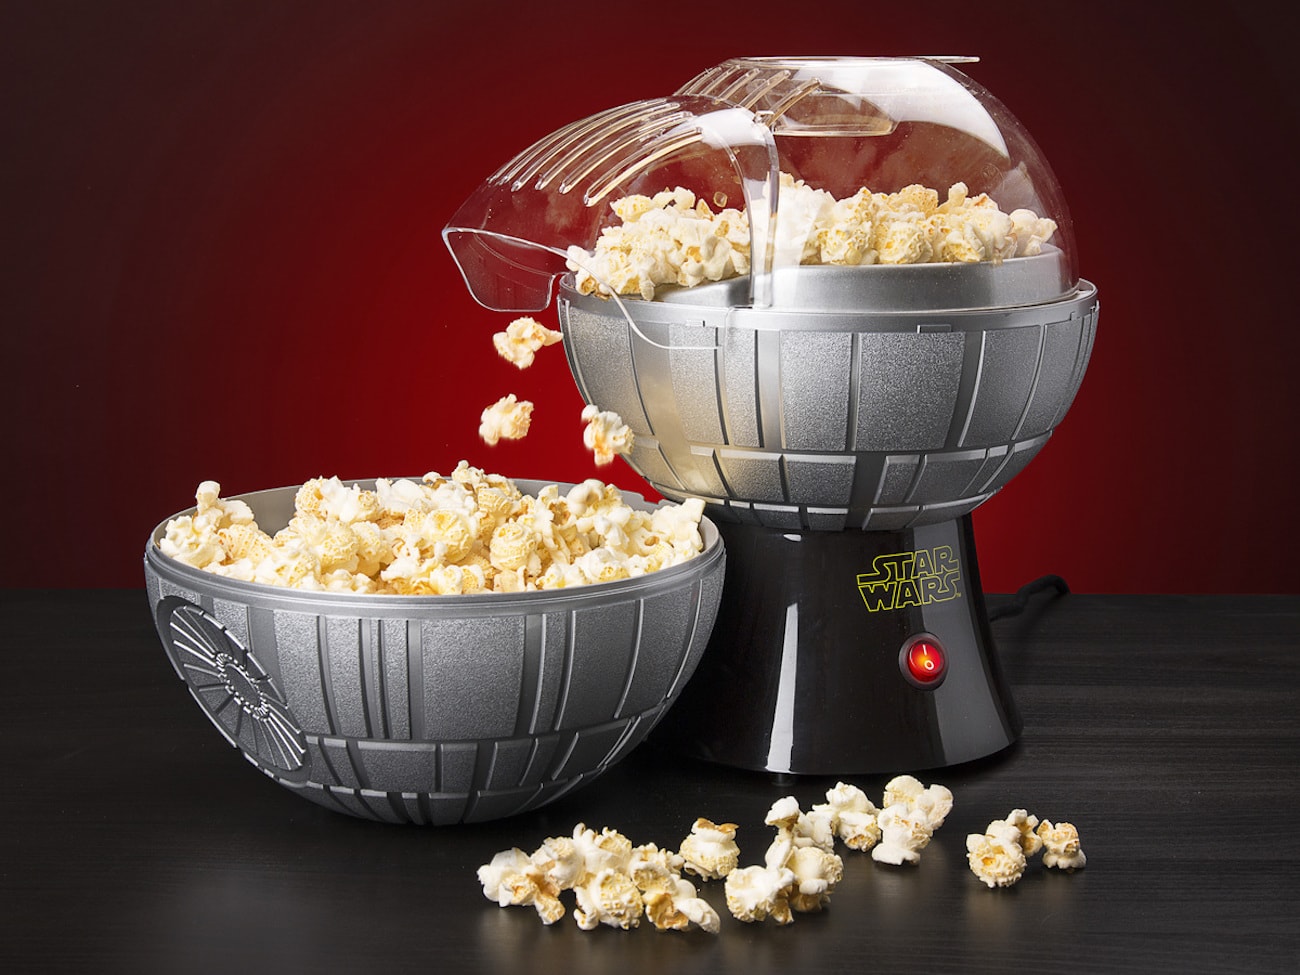 Uncanny Brands Star Wars Death Star Popcorn Maker doesn’t require butter or oil to work